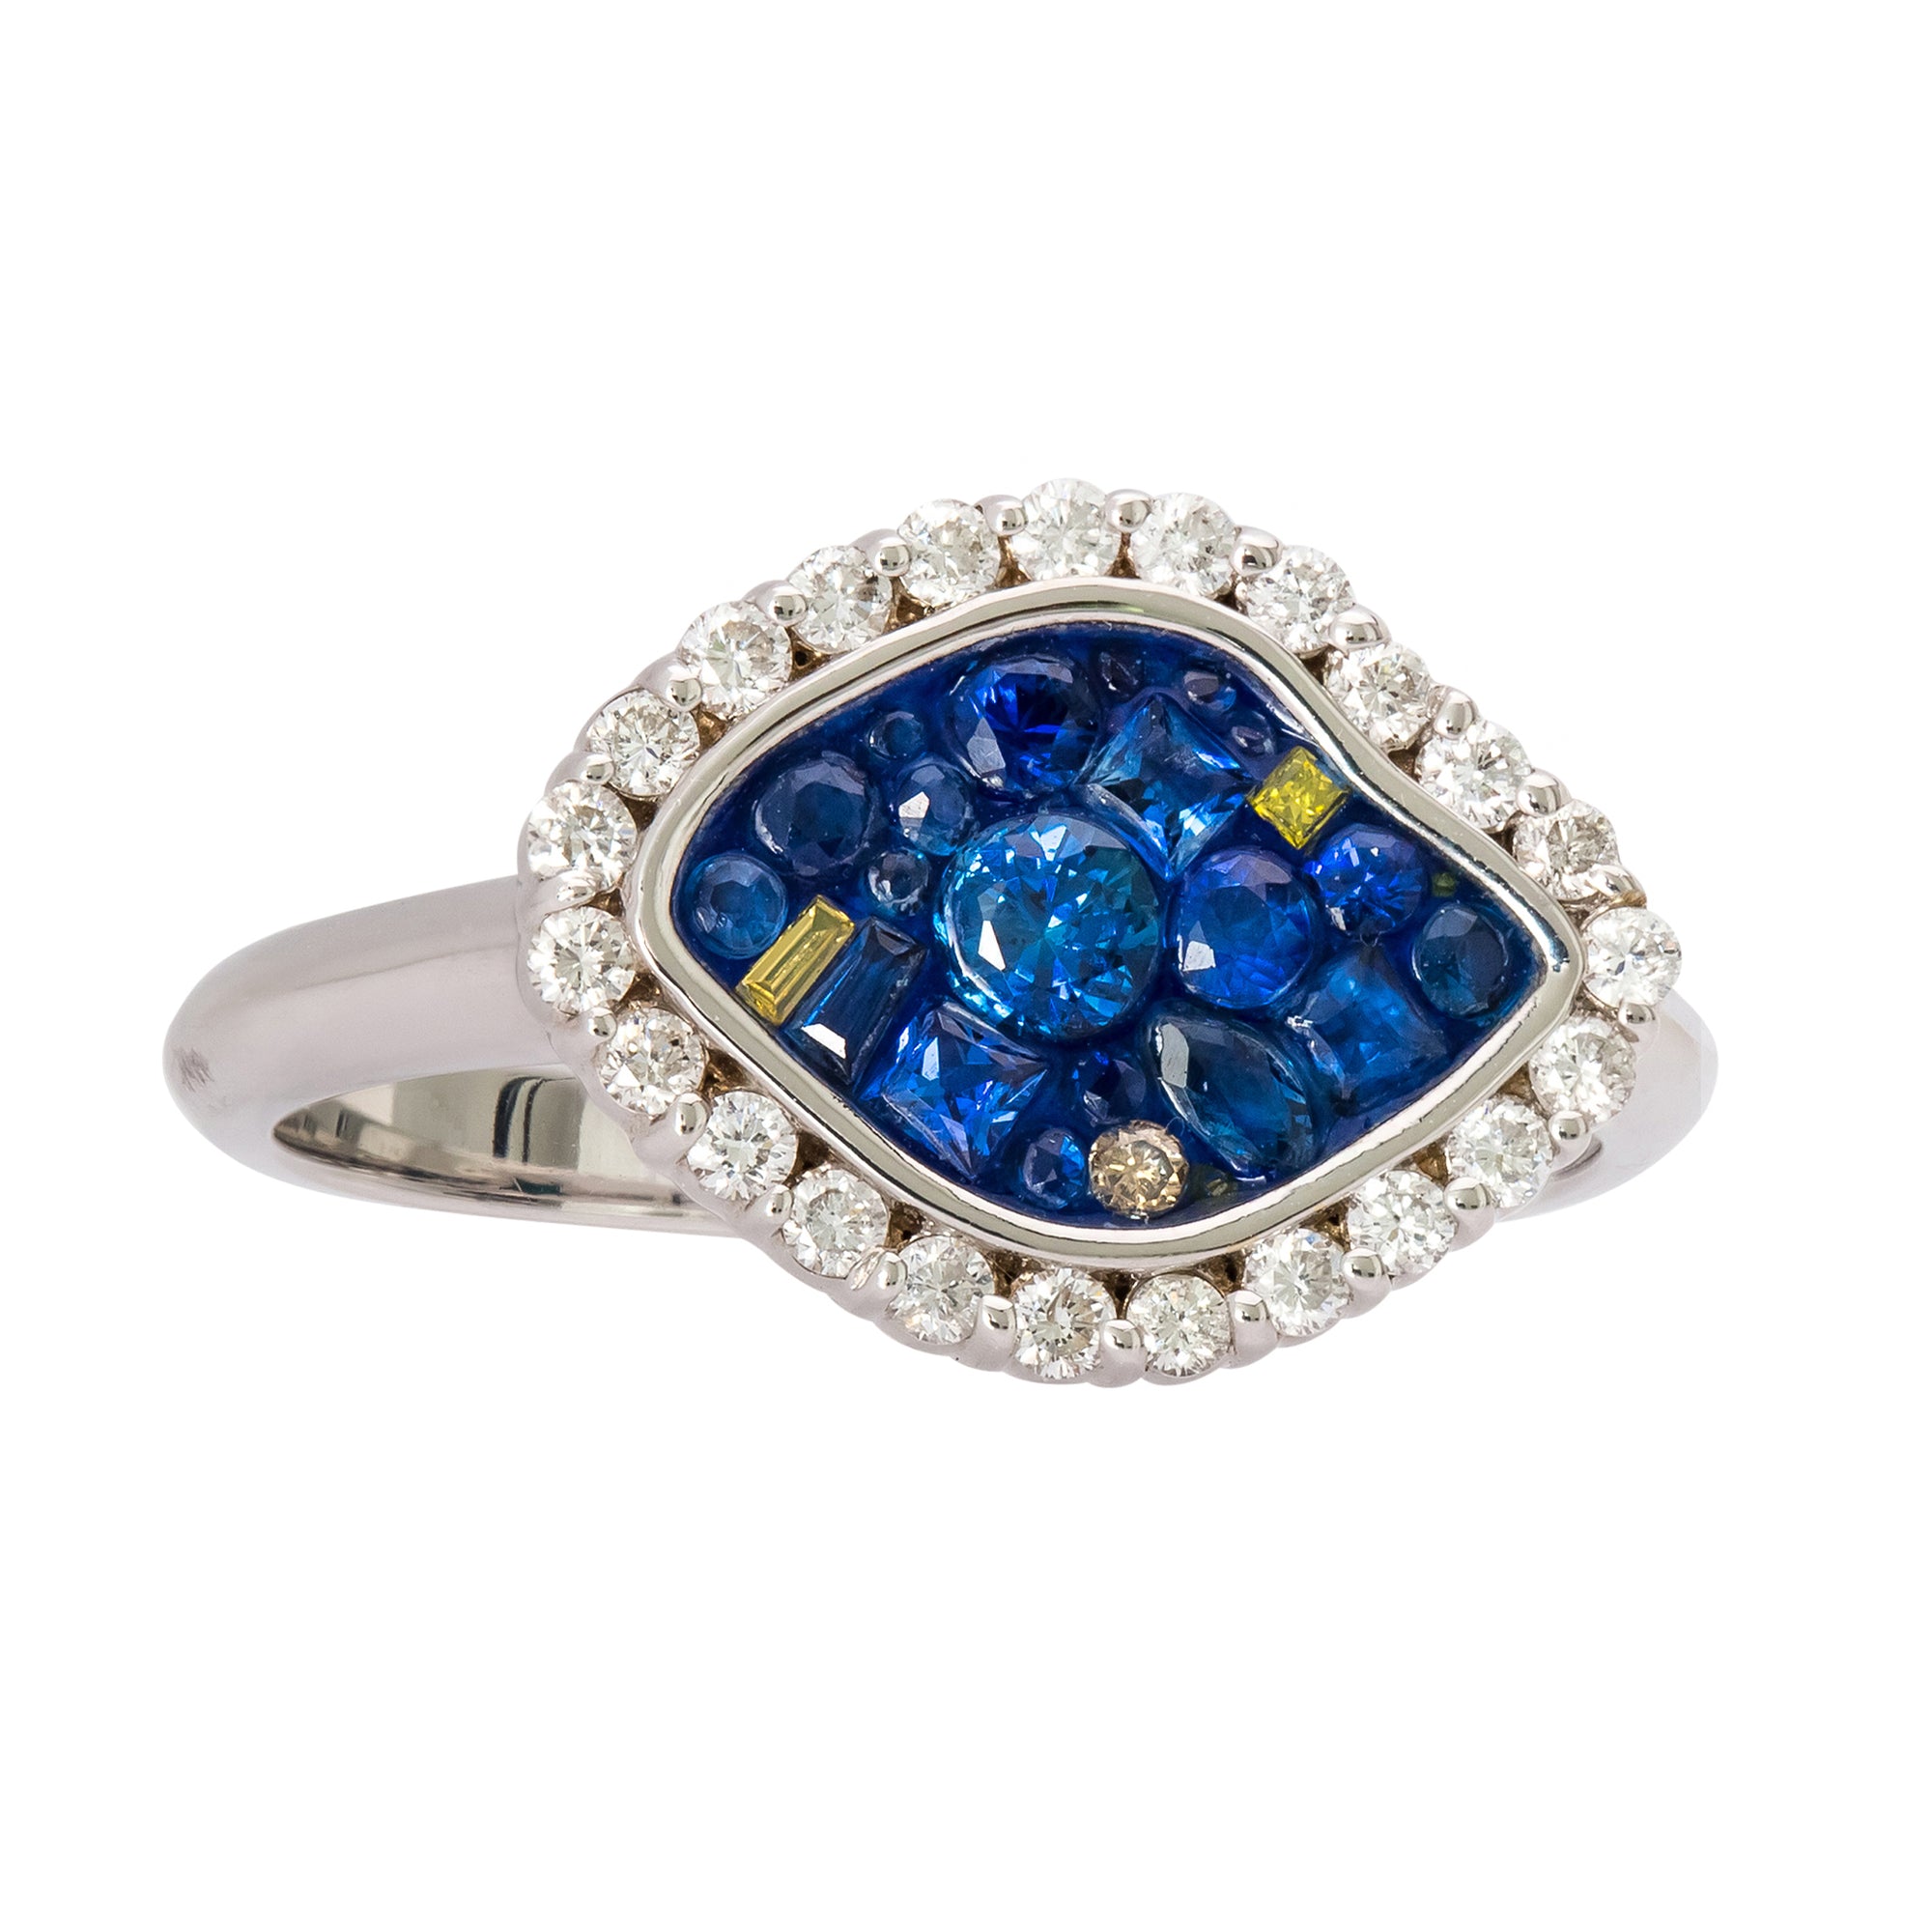 Deep Ocean Sapphire & Diamond Ring by Pleve available at Talisman Collection Fine Jewelers in El Dorado Hills, CA and online. Specs: .90 cttw color enhanced diamonds, natural sapphires, 18k yellow gold.